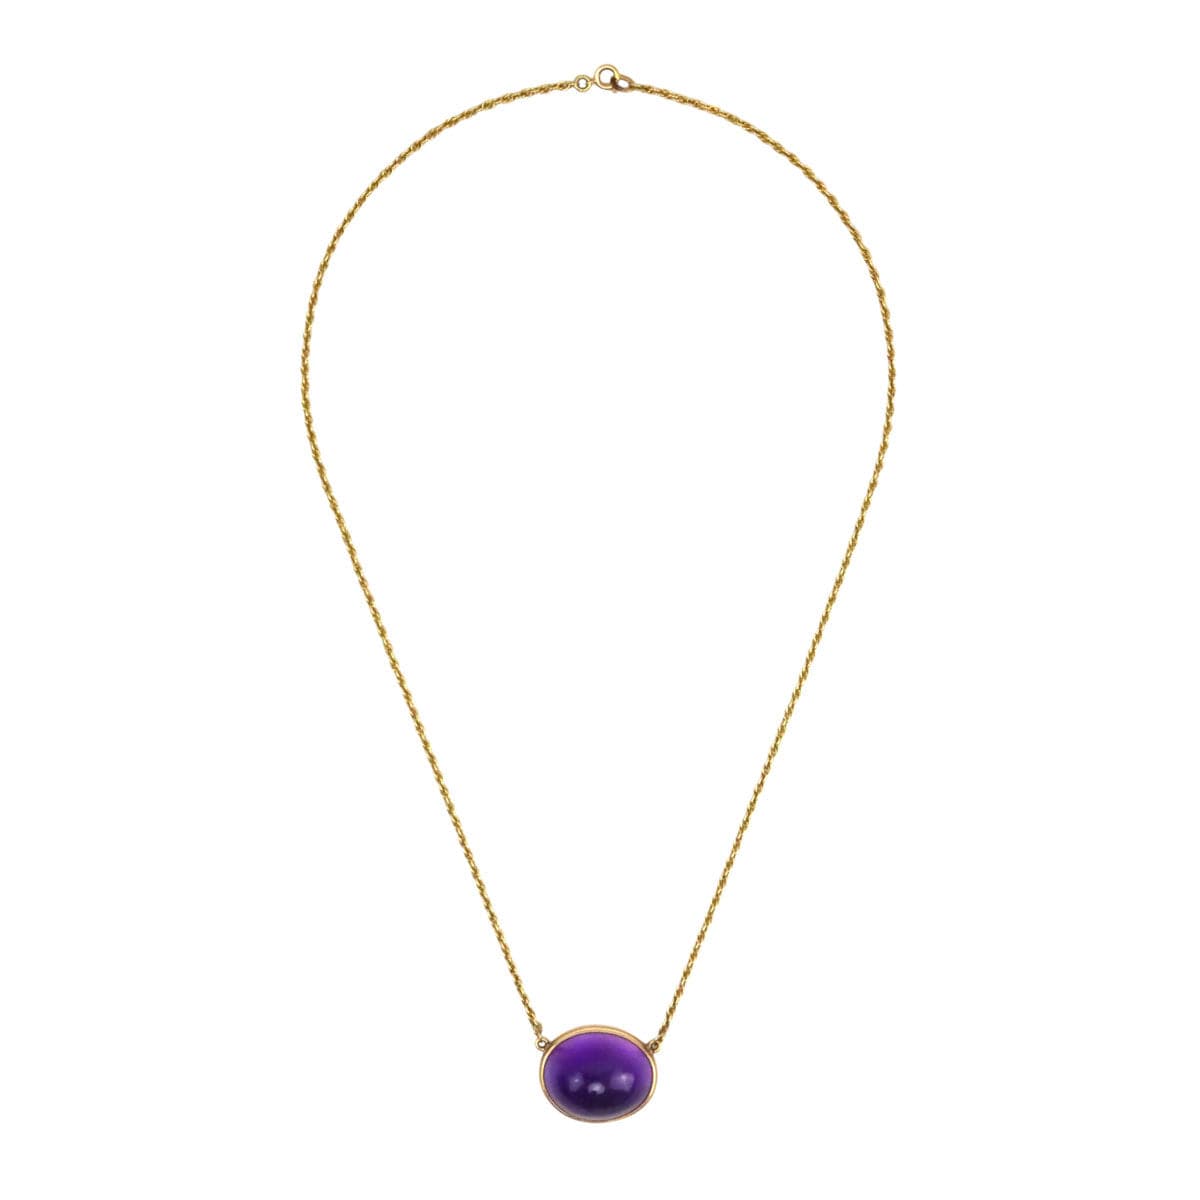 Frank Patania Jr. - Amethyst and 14K Gold Necklace, 16" length (J91699-1222-015)